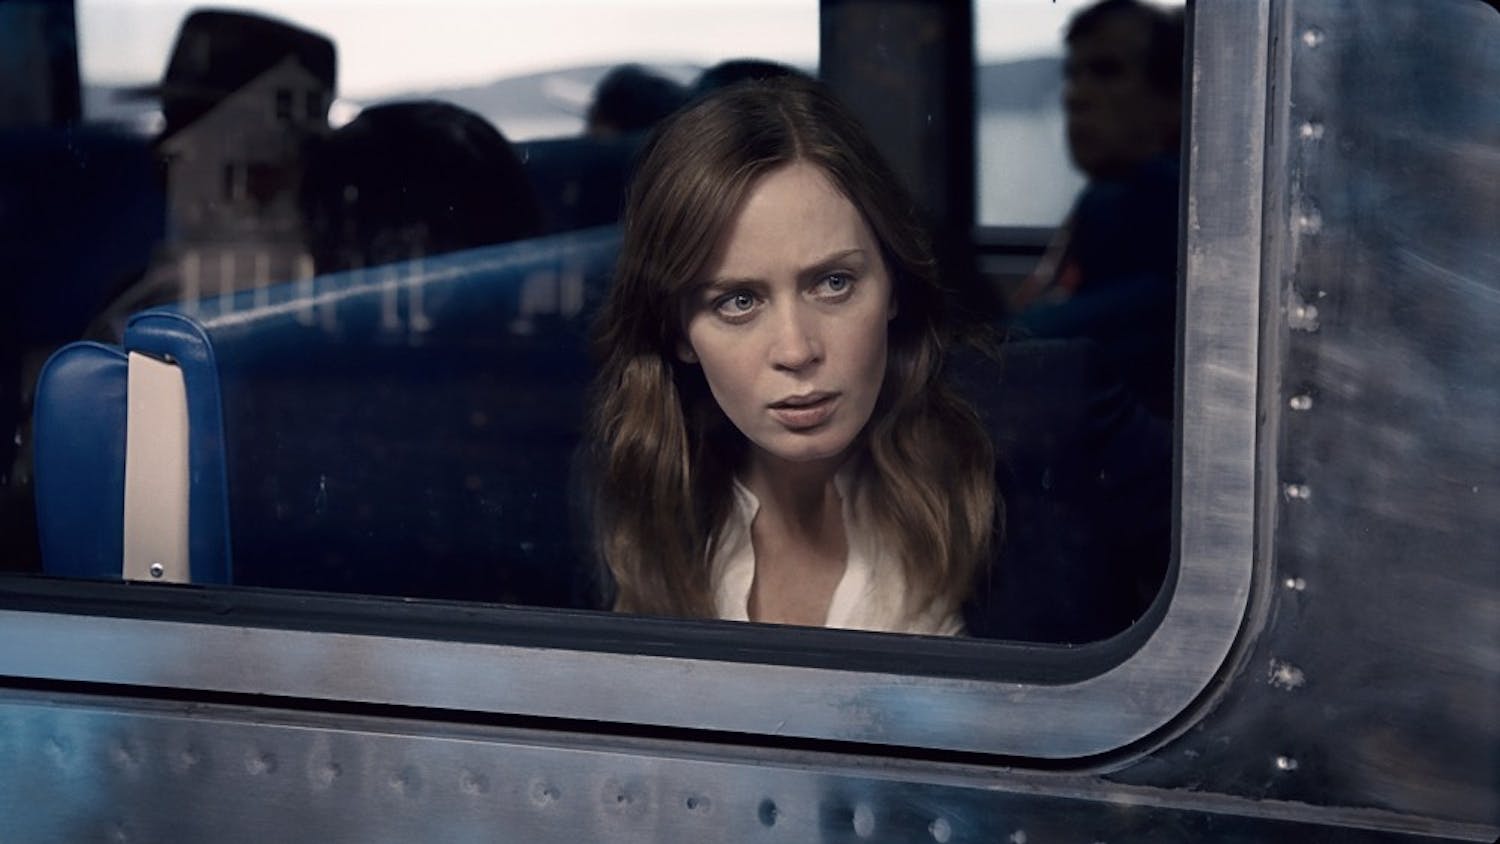 Emily Blunt plays Rachel Watson in the film "The Girl on the Train." (DreamWorks Pictures)